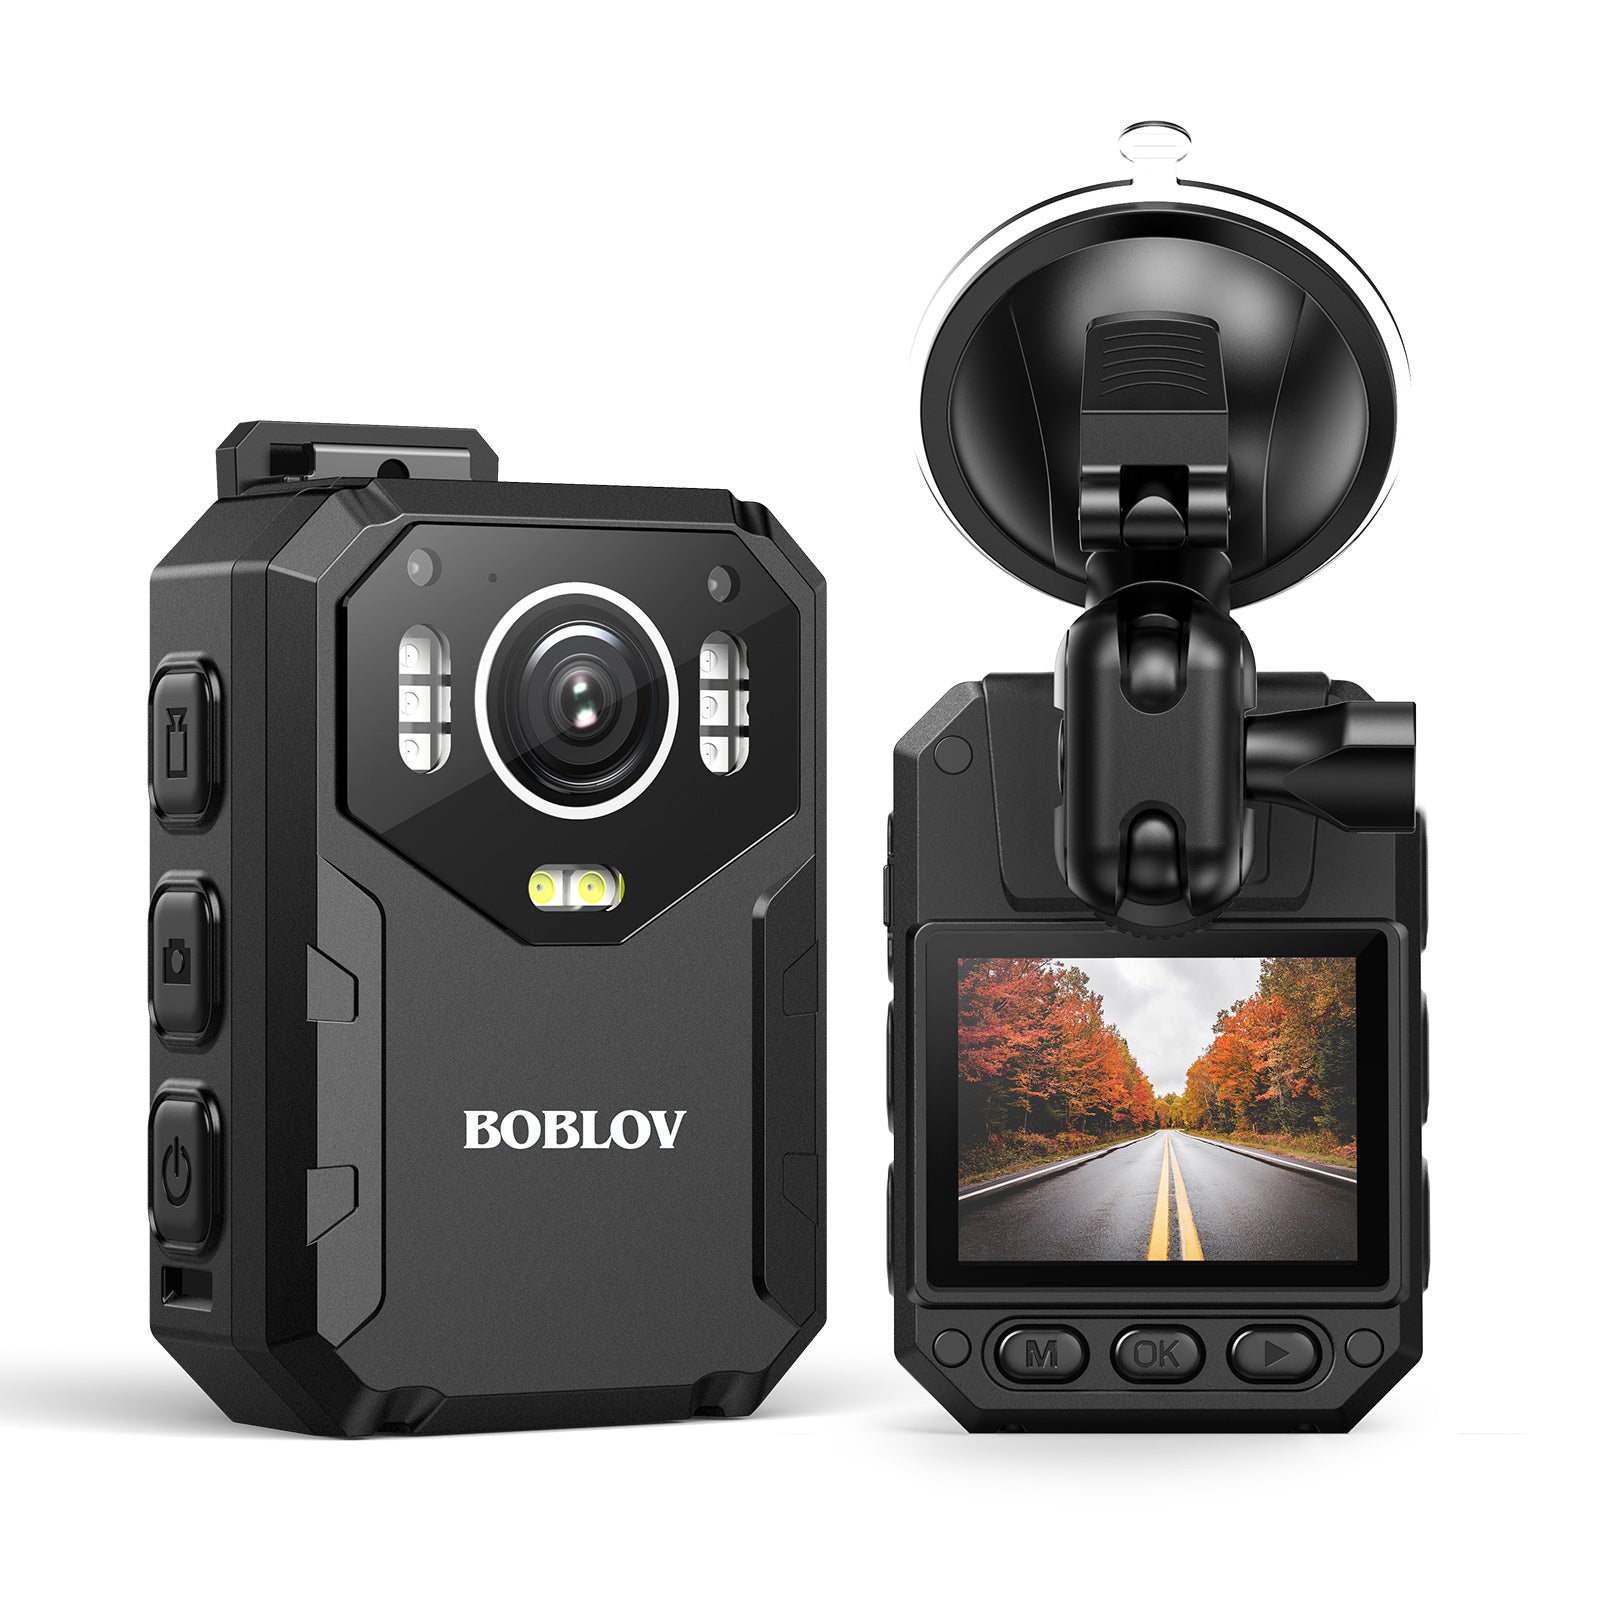 BOBLOV B4K1 128GB 4K body camera with GPS and 3100mAh battery for extended 10-12 hours shooting, includes car suction mount and charger5